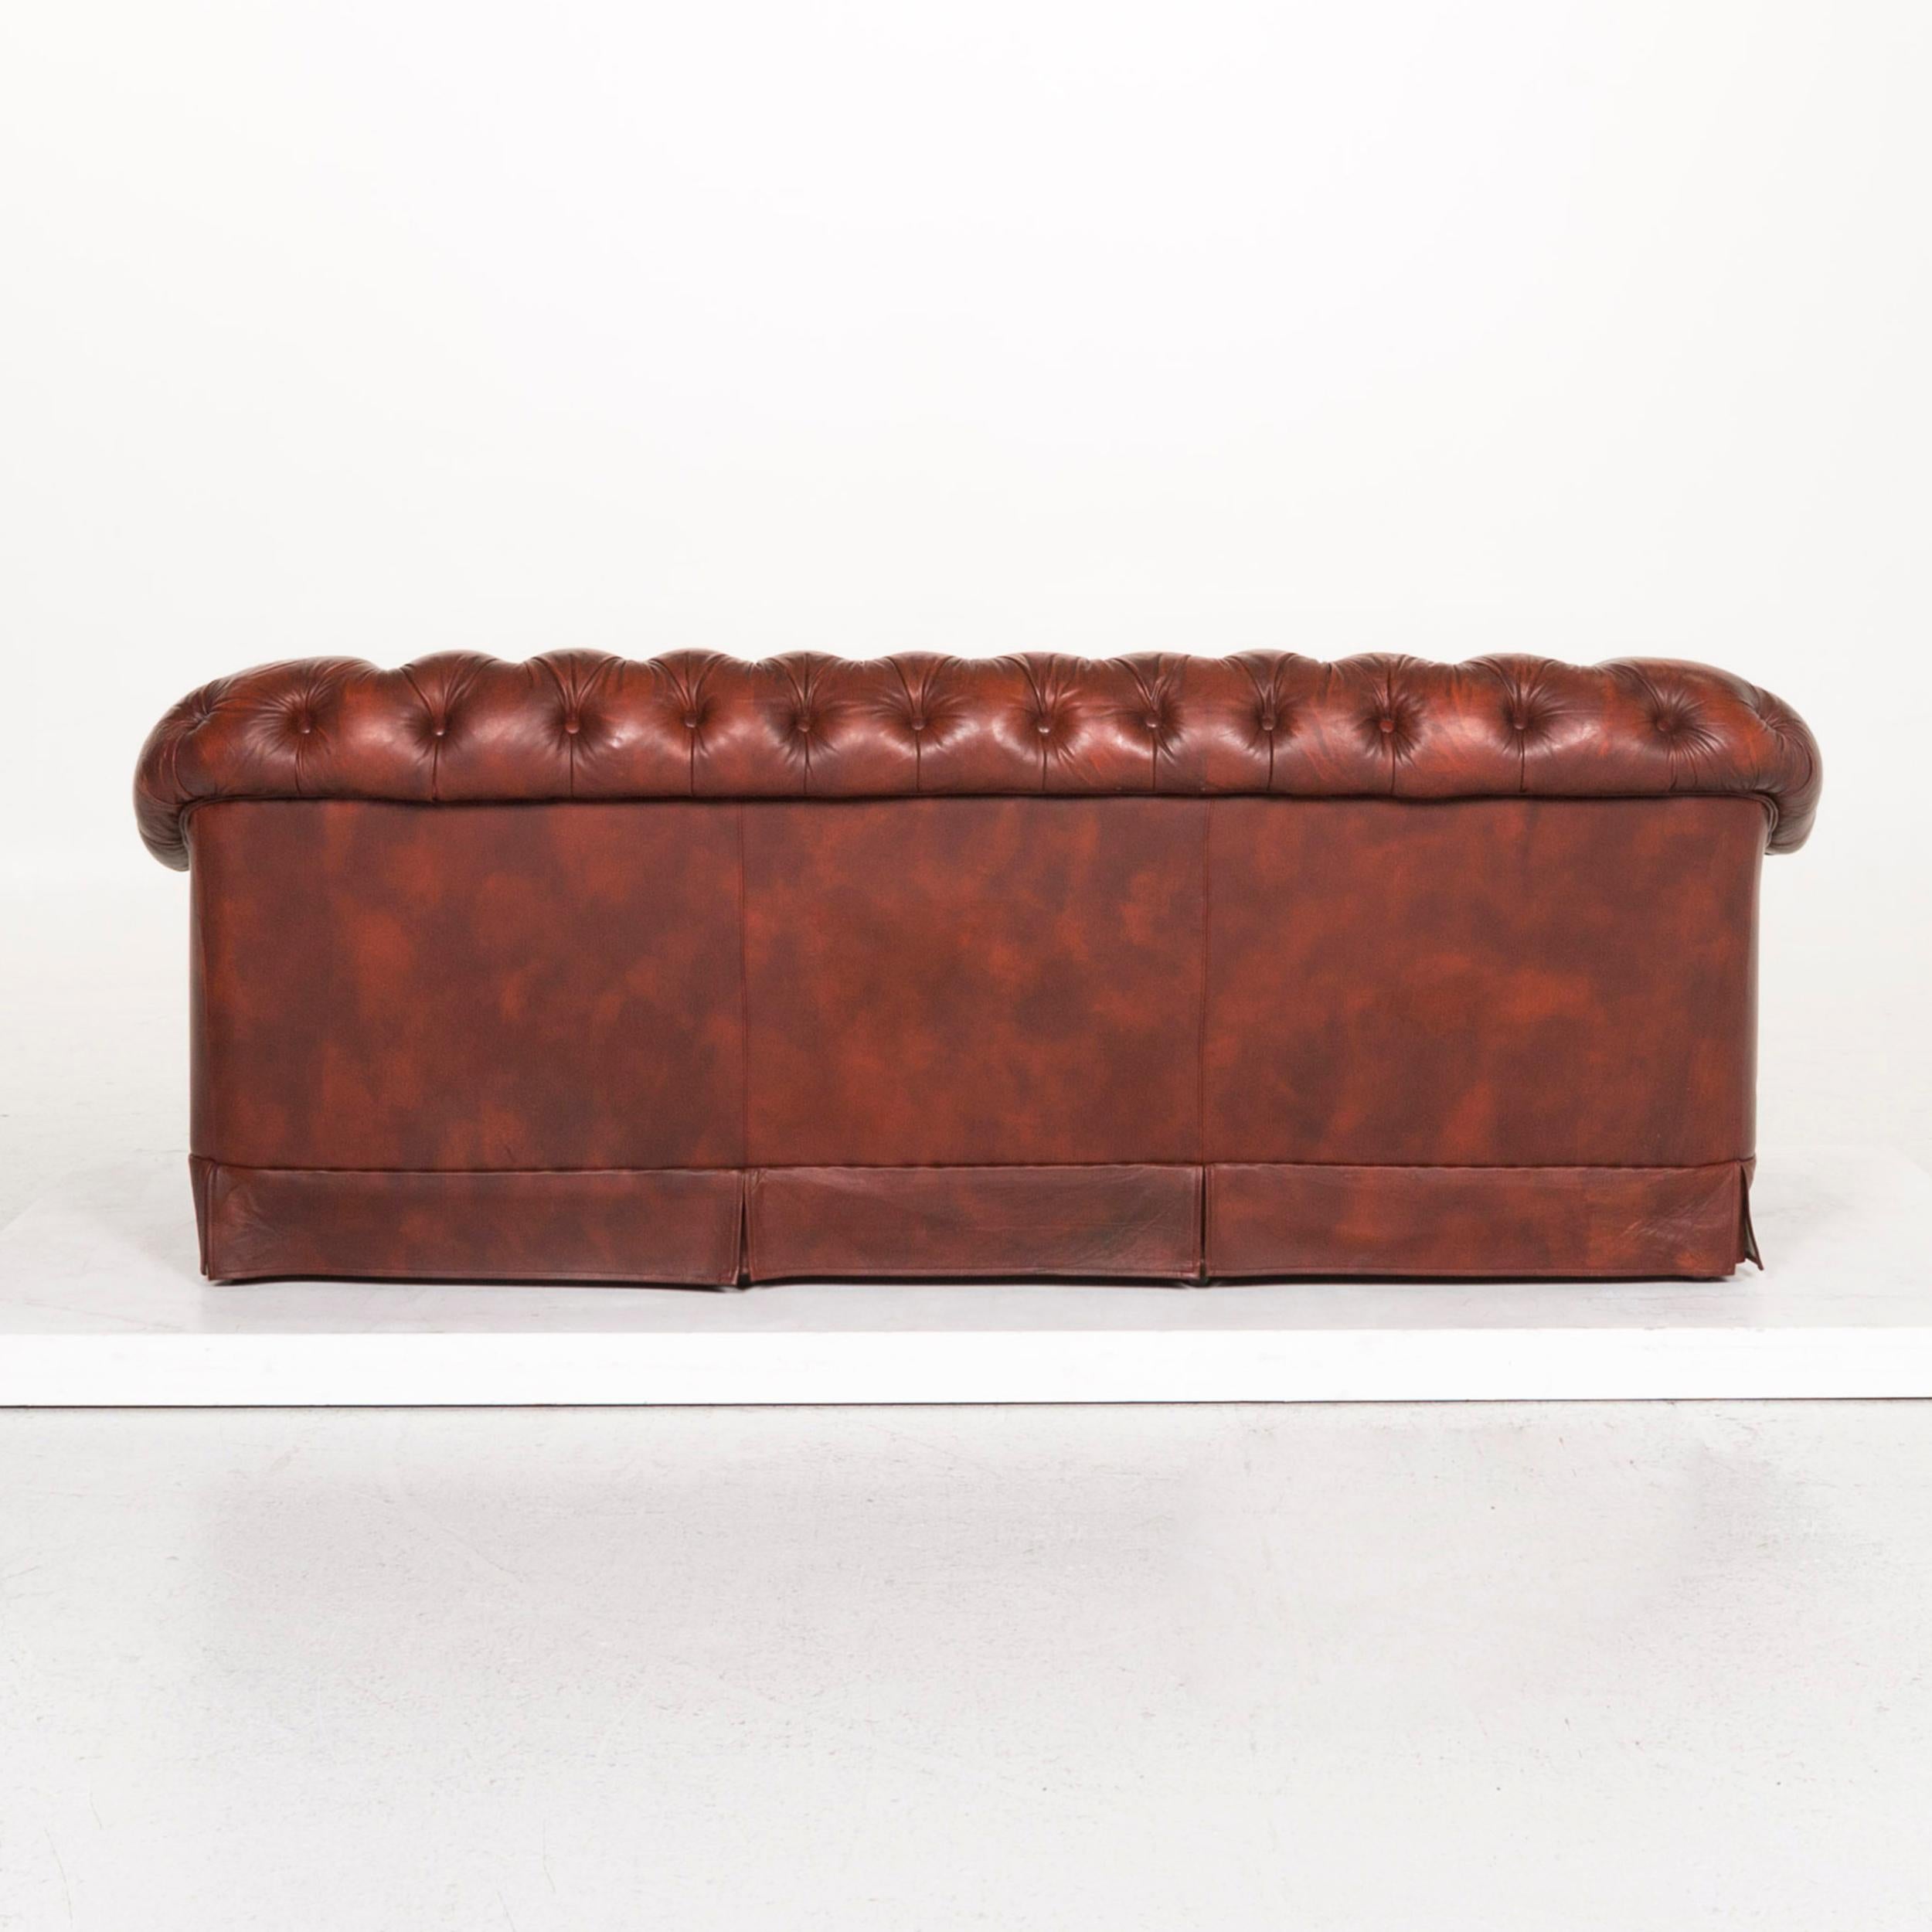 Chesterfield Leather Sofa Red Three-Seat Retro Vintage Couch For Sale 1